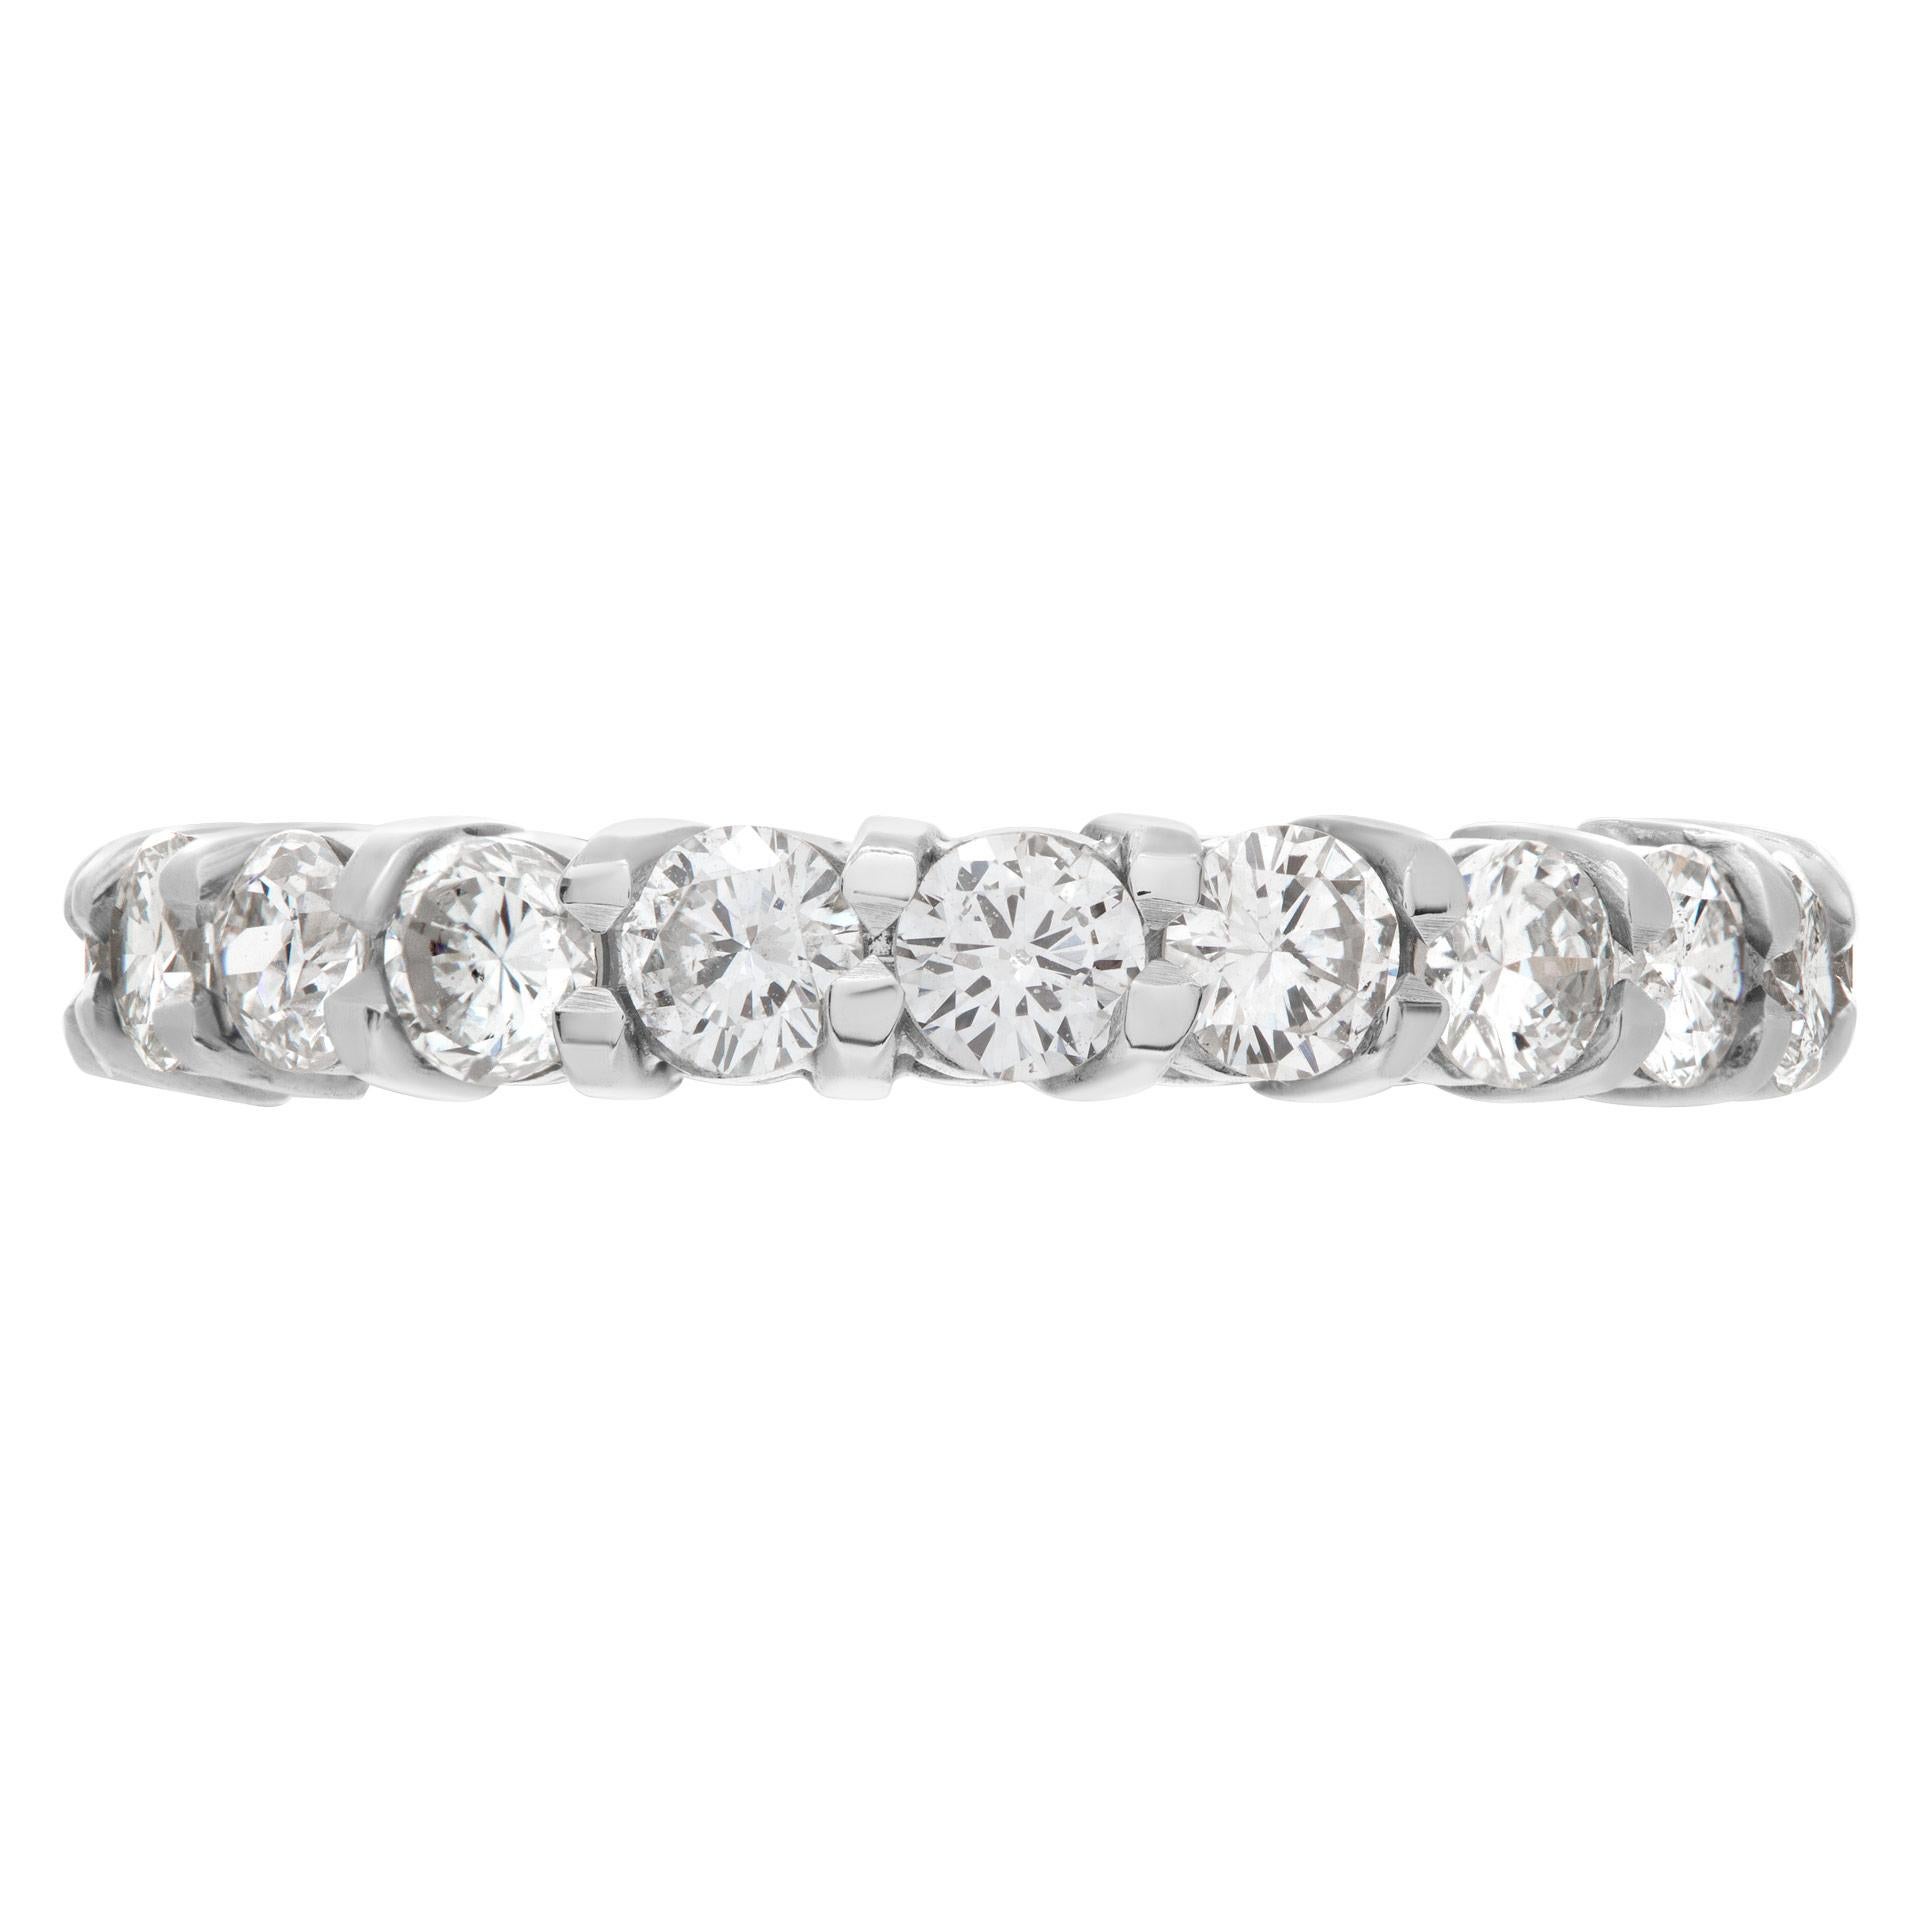 Eternity diamond band with 20 round brilliant cut diamonds averaging 0.09 carat each for a total of approximately 1.95 carats in G-H color, VS-SI clarity diamonds all set in platinum. Size 6 This Diamond ring is currently size 6 and some items can